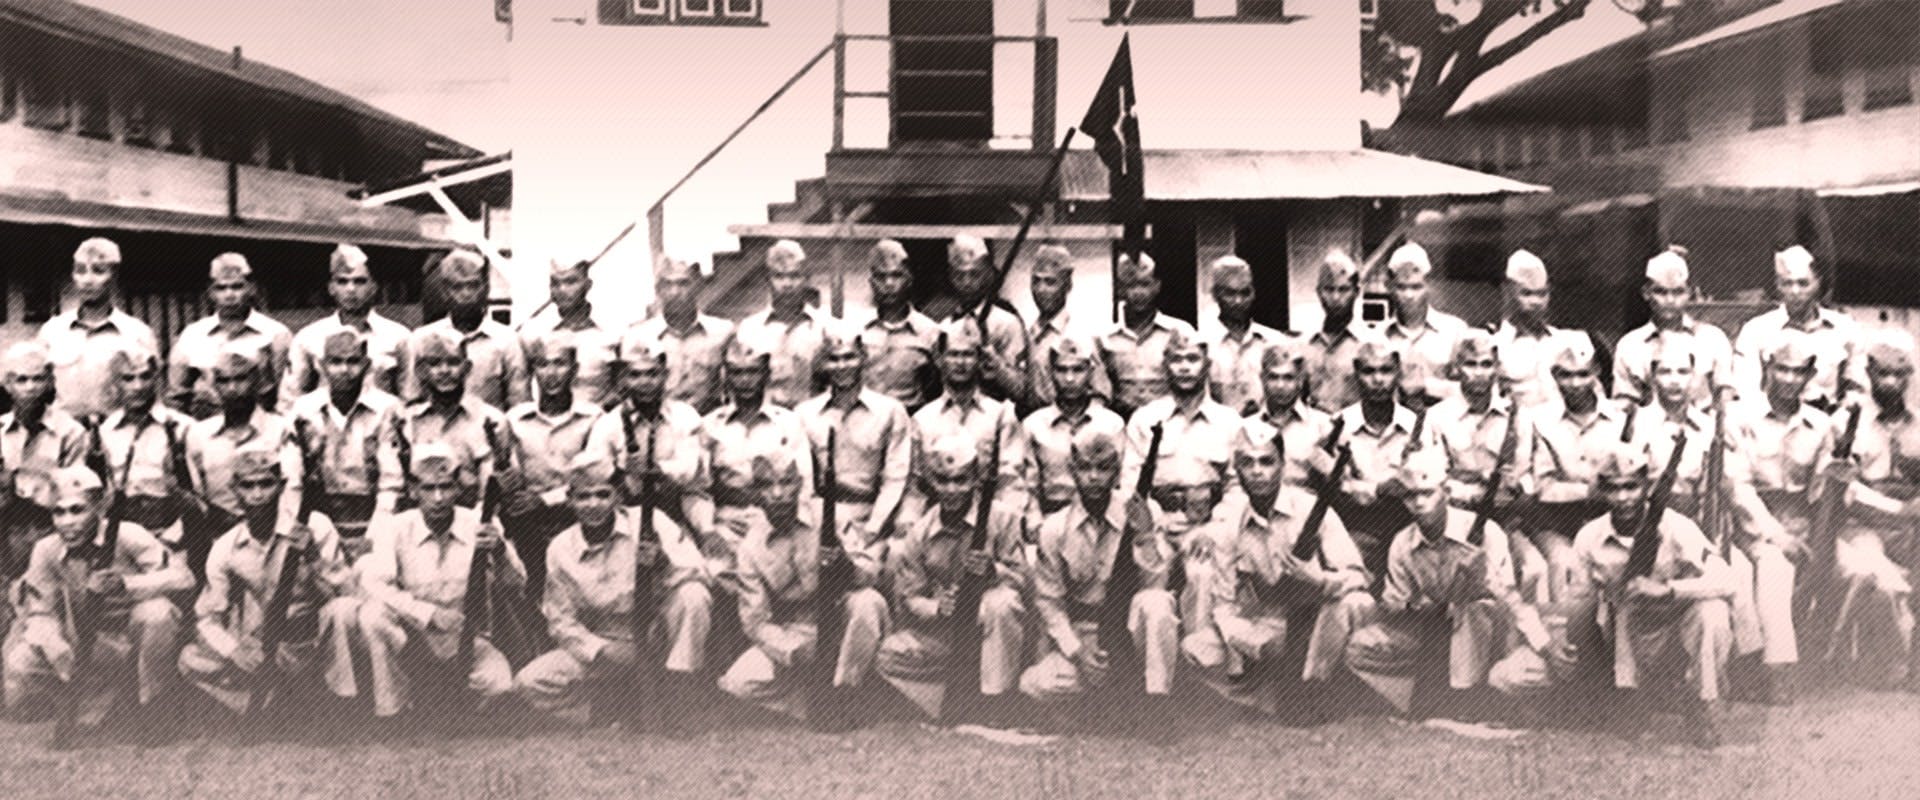 A black and white photograph of a group of uniformed individuals posing in front of a building with multiple steps leading up to it. The individuals are arranged in three rows, with those in the front row seated and holding rifles. The uniforms consist of shirts, ties, and caps. The background features the building and a tree.